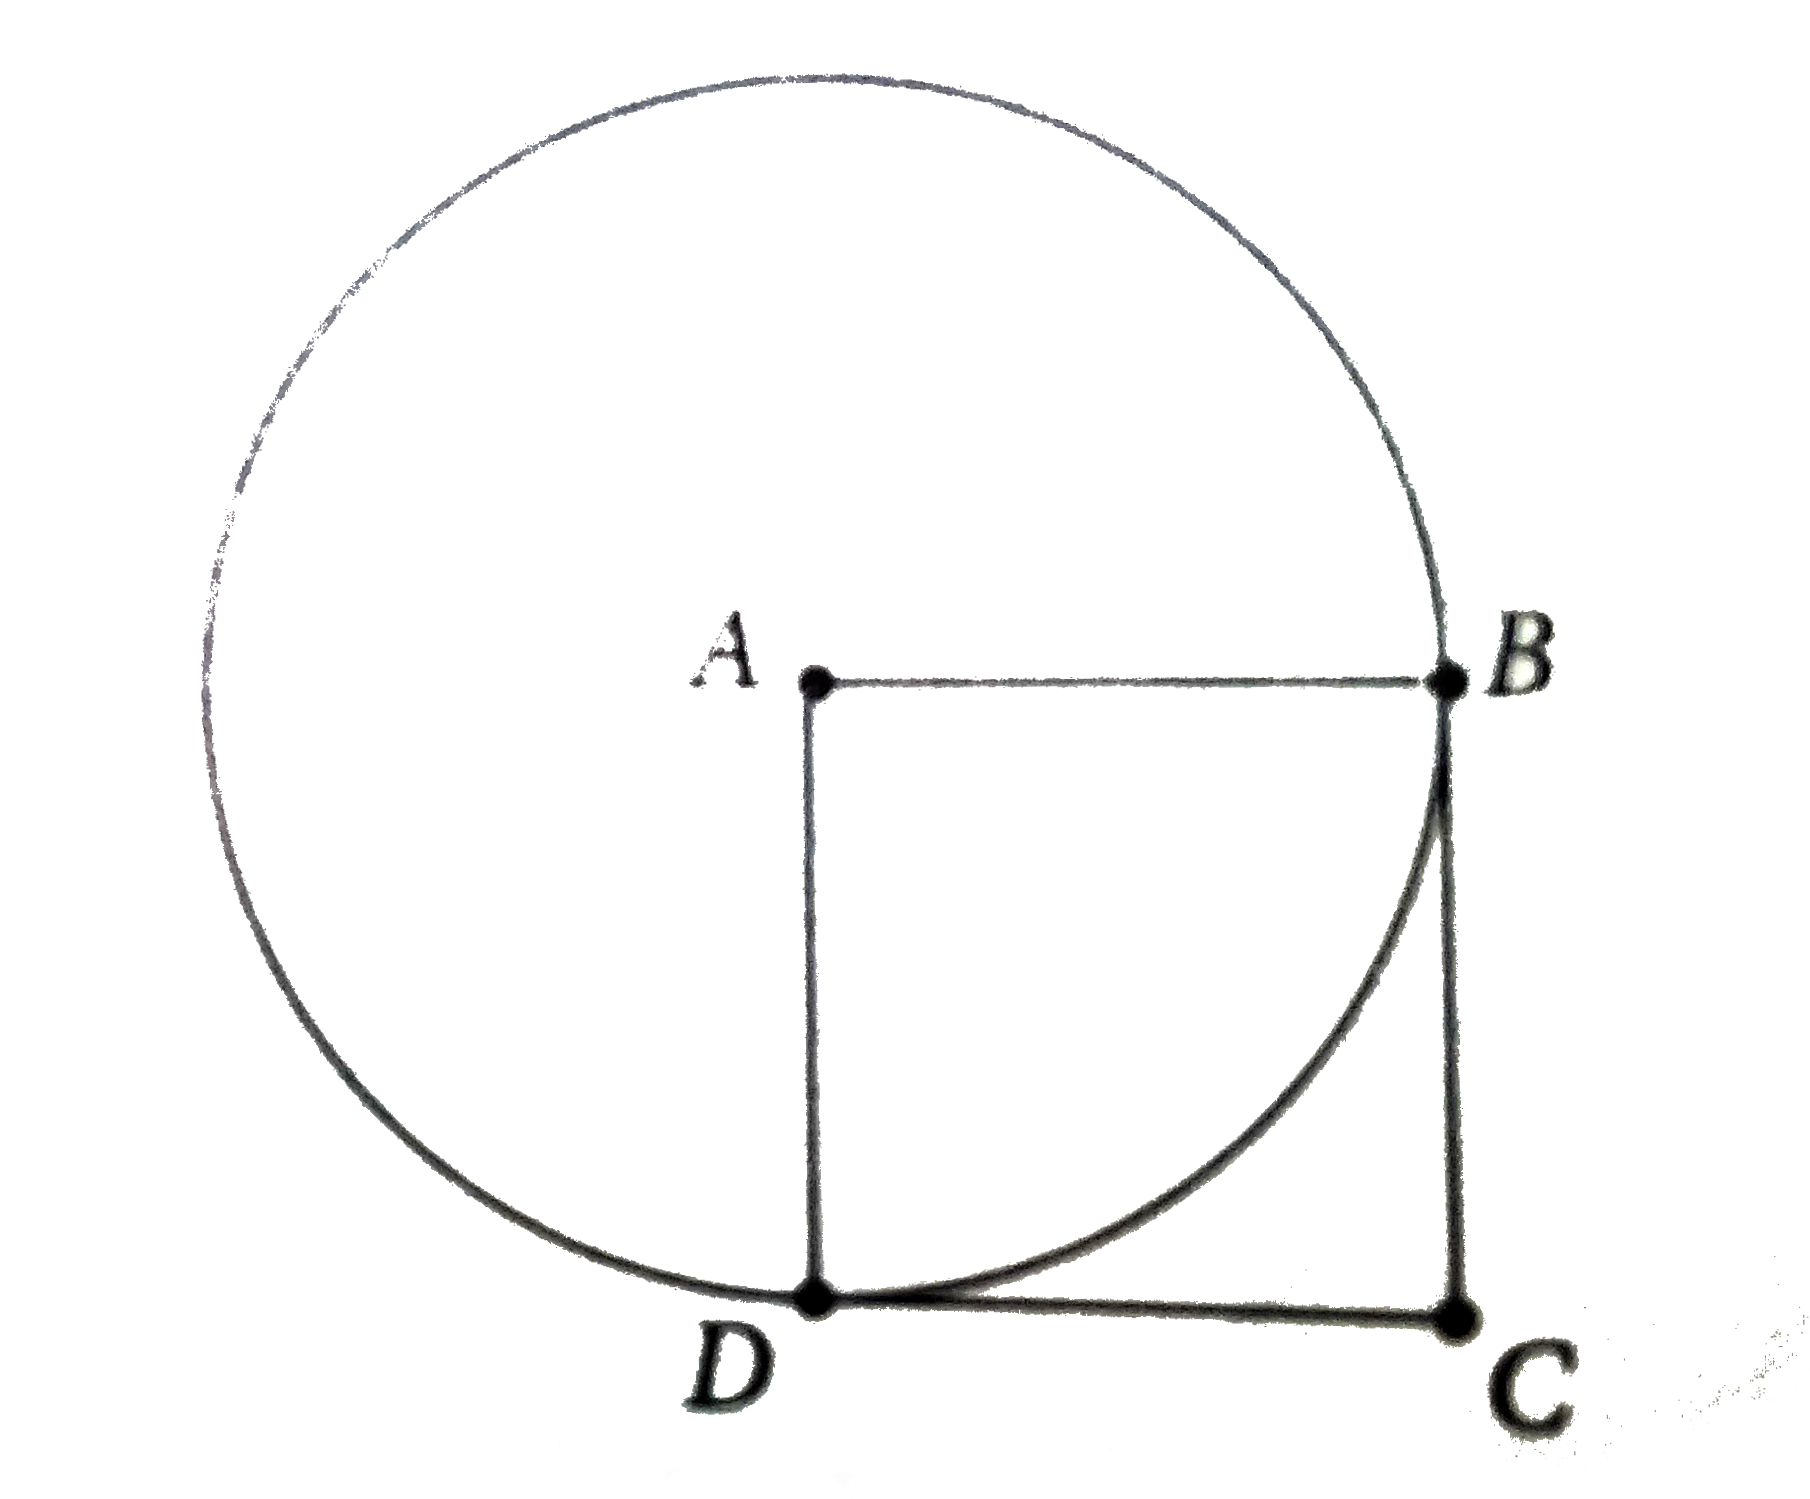 Points D and B lie on the circle above with center A. If square ABCD has an area of 16, what is the length of arc BD?